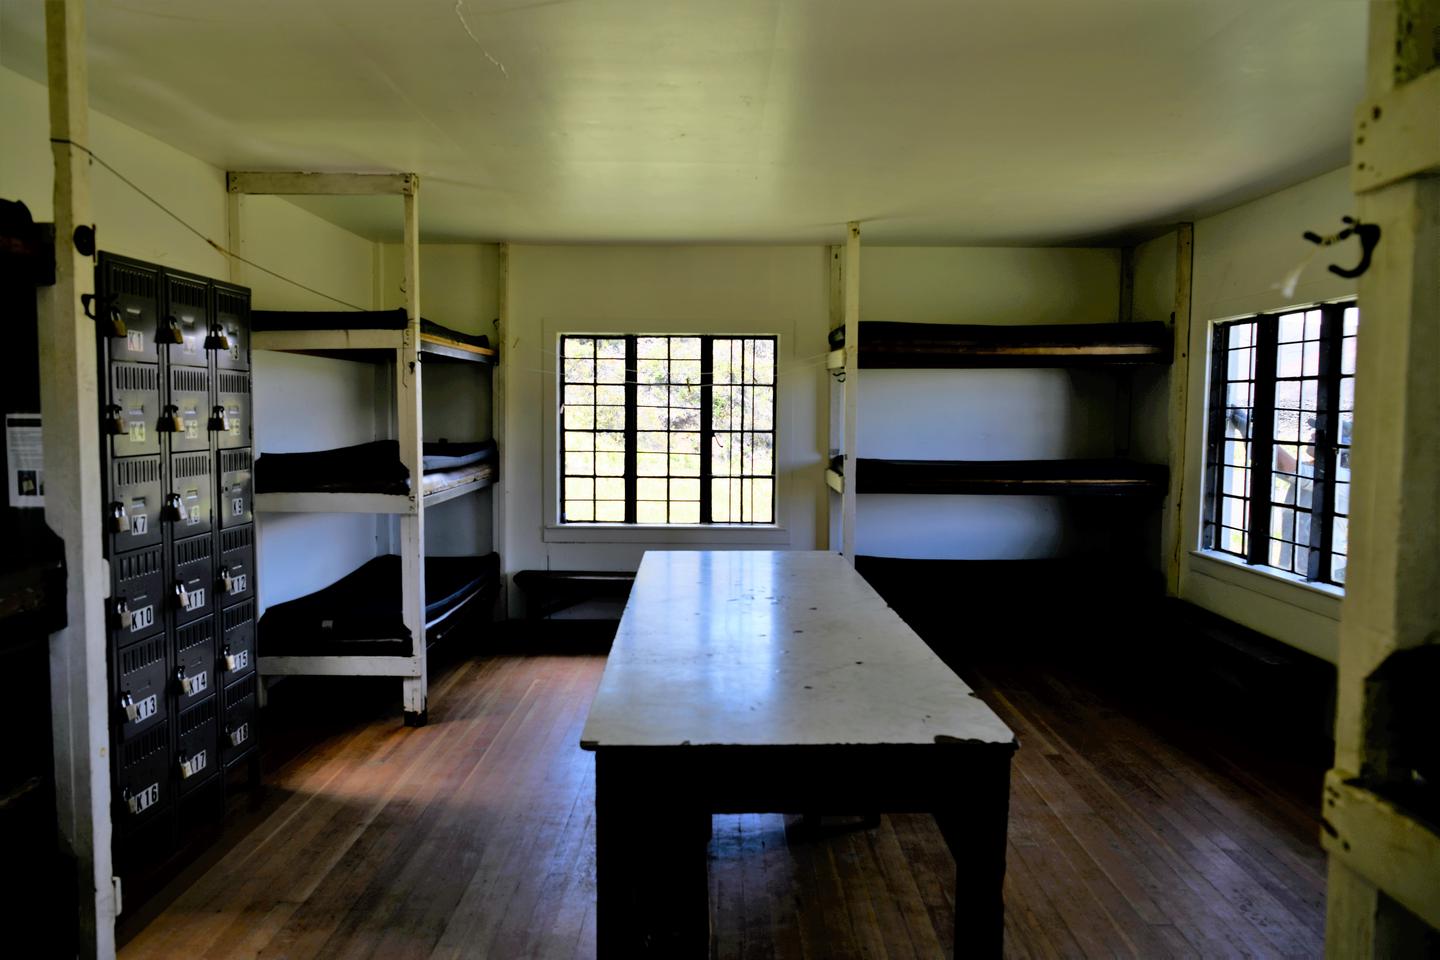 interior view of cabin showing stacked bunks, table, and lockers.Each cabin is equipped with 12 padded bunks, one long dining table, and a system of lockers for assignment of wood. Not pictured in the kitchen: wood stove, propane stove, and sink.